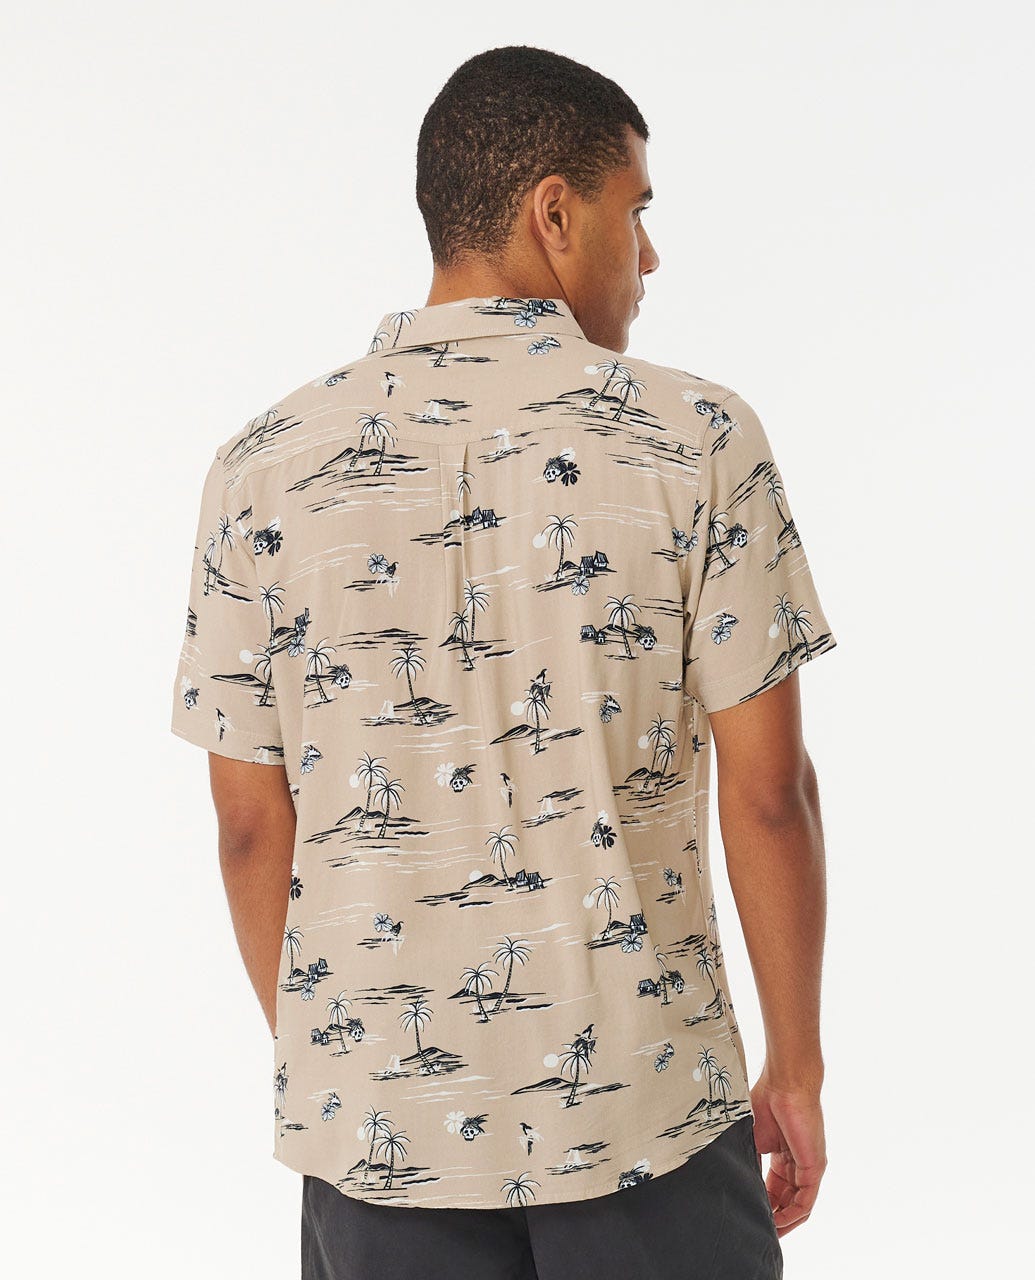 Rip Curl Party Pack Short Sleeve Shirt - Taupe - Sun Diego Boardshop